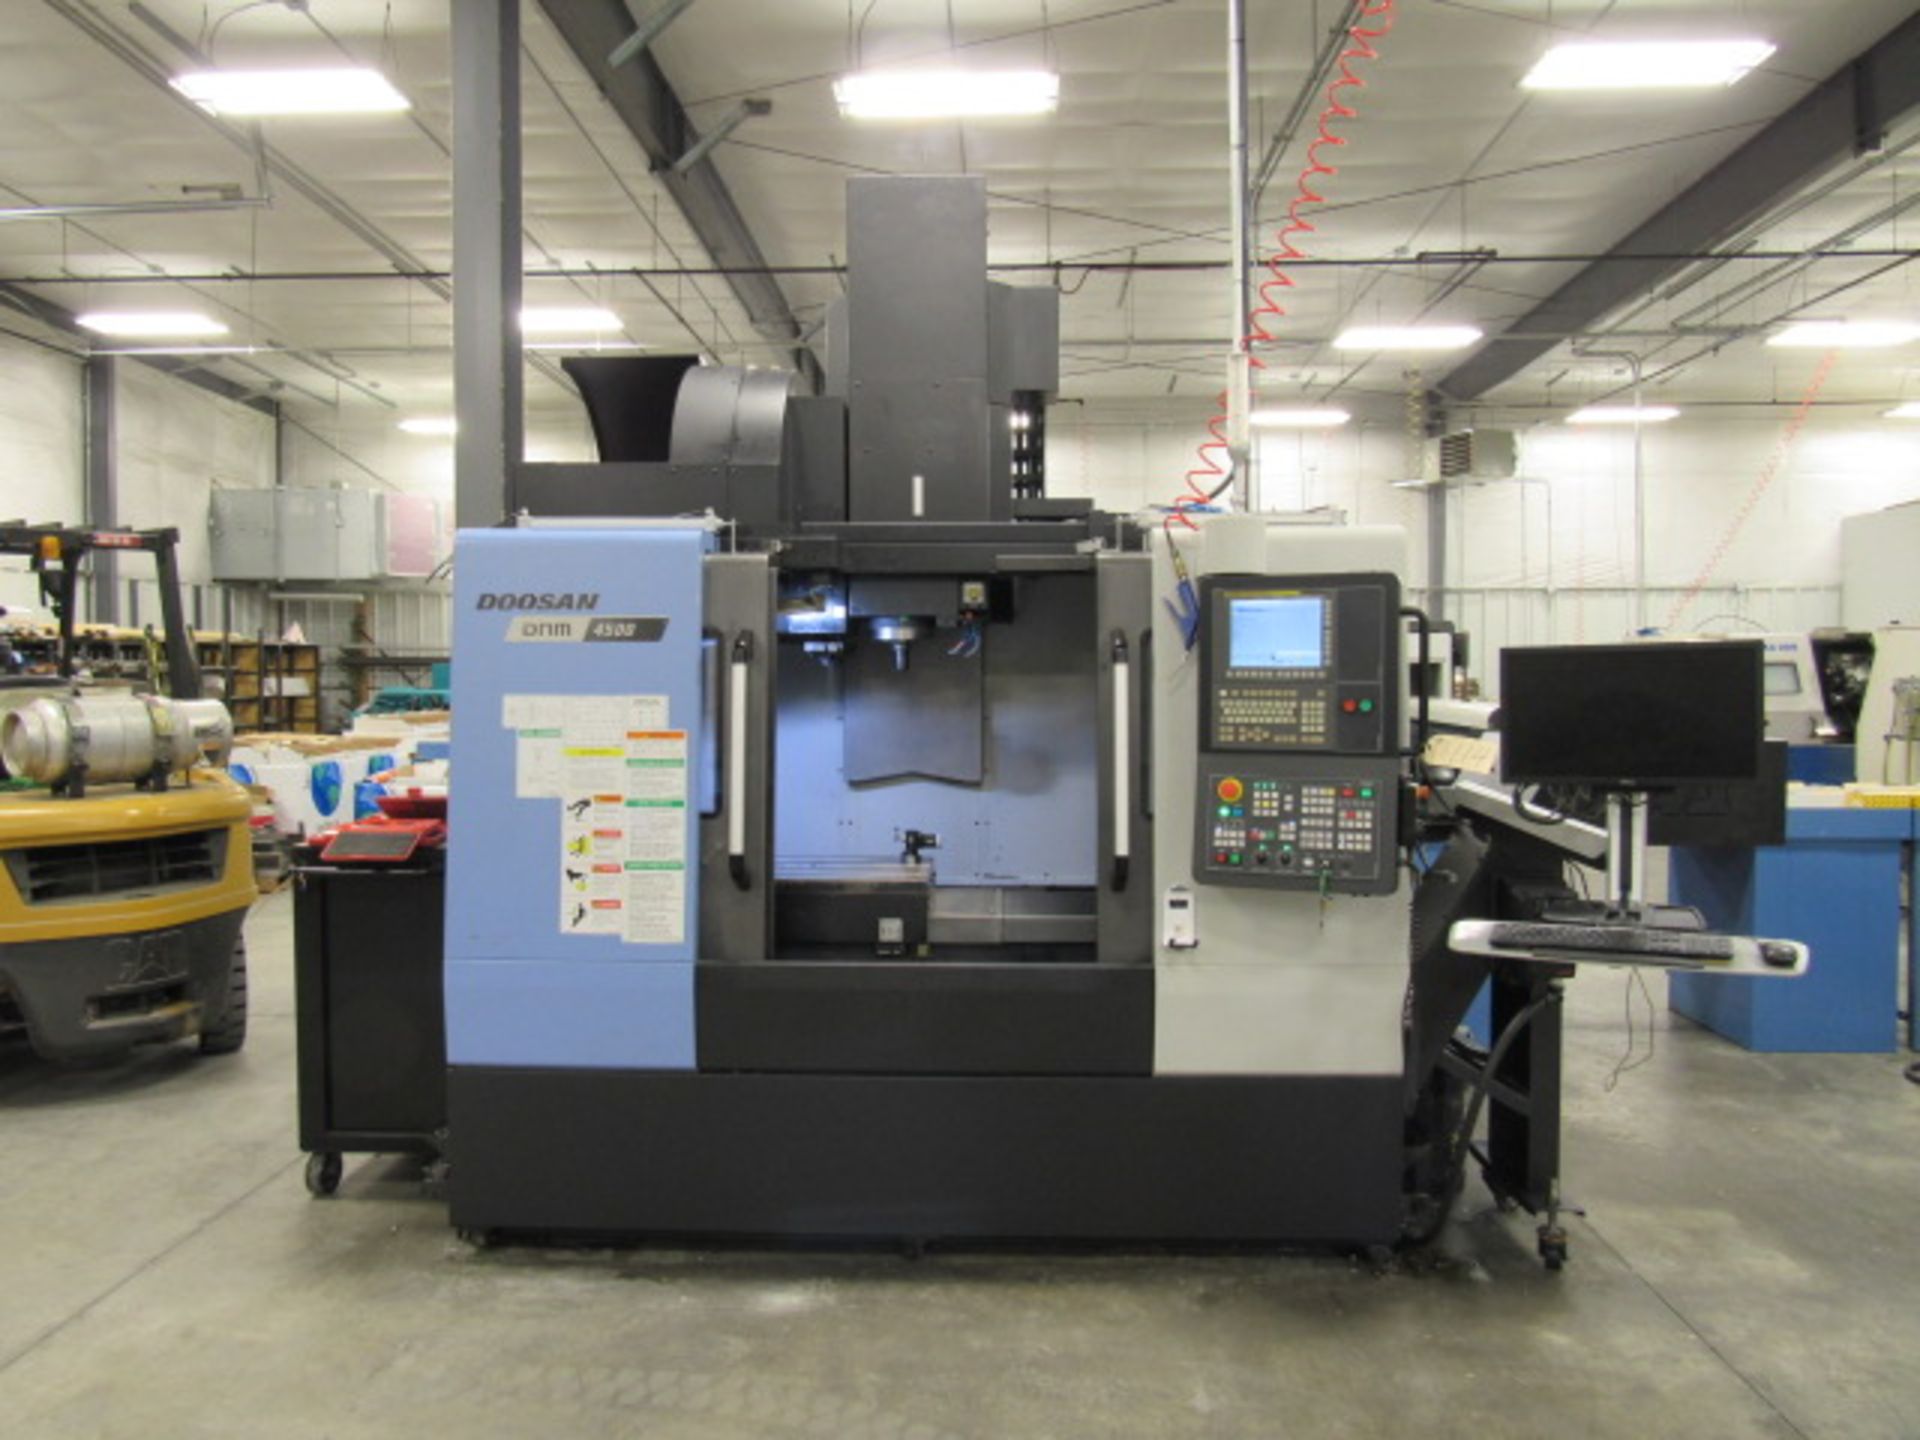 Doosan DNM 4500 CNC Vertical Machining Center with 39.4'' x 17.7'' Tables, Big Plus #40, Spindle - Image 8 of 8